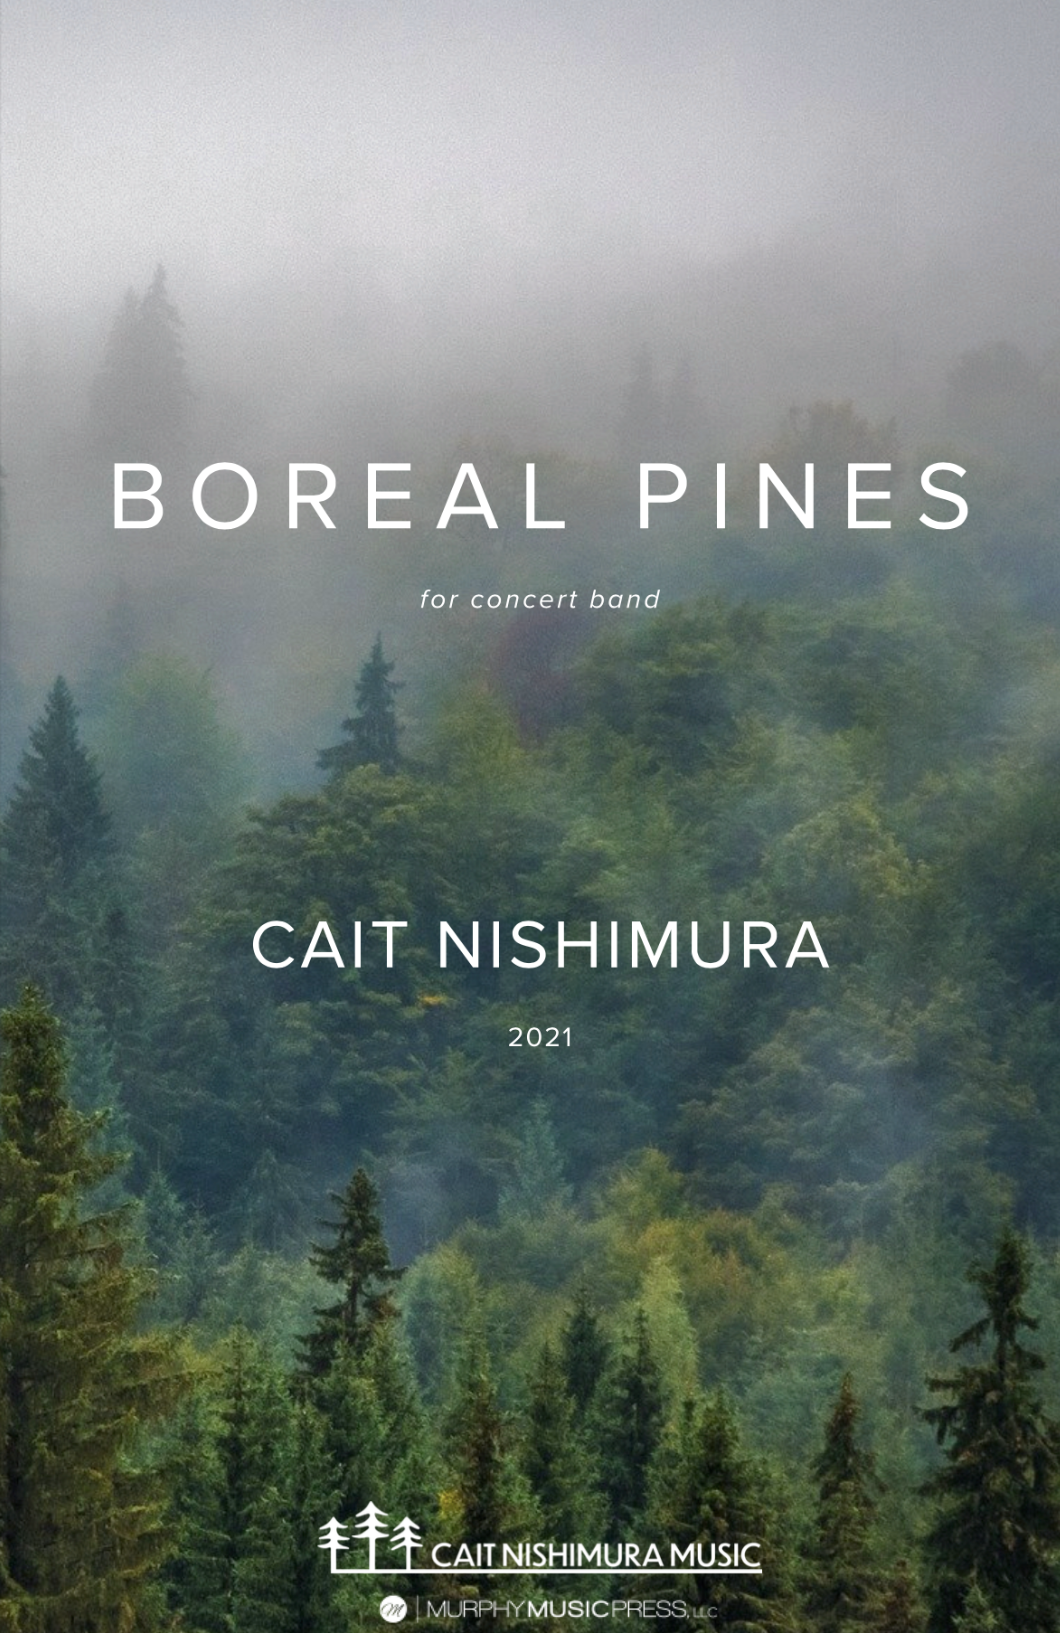 Boreal Pines by Cait Nishimura